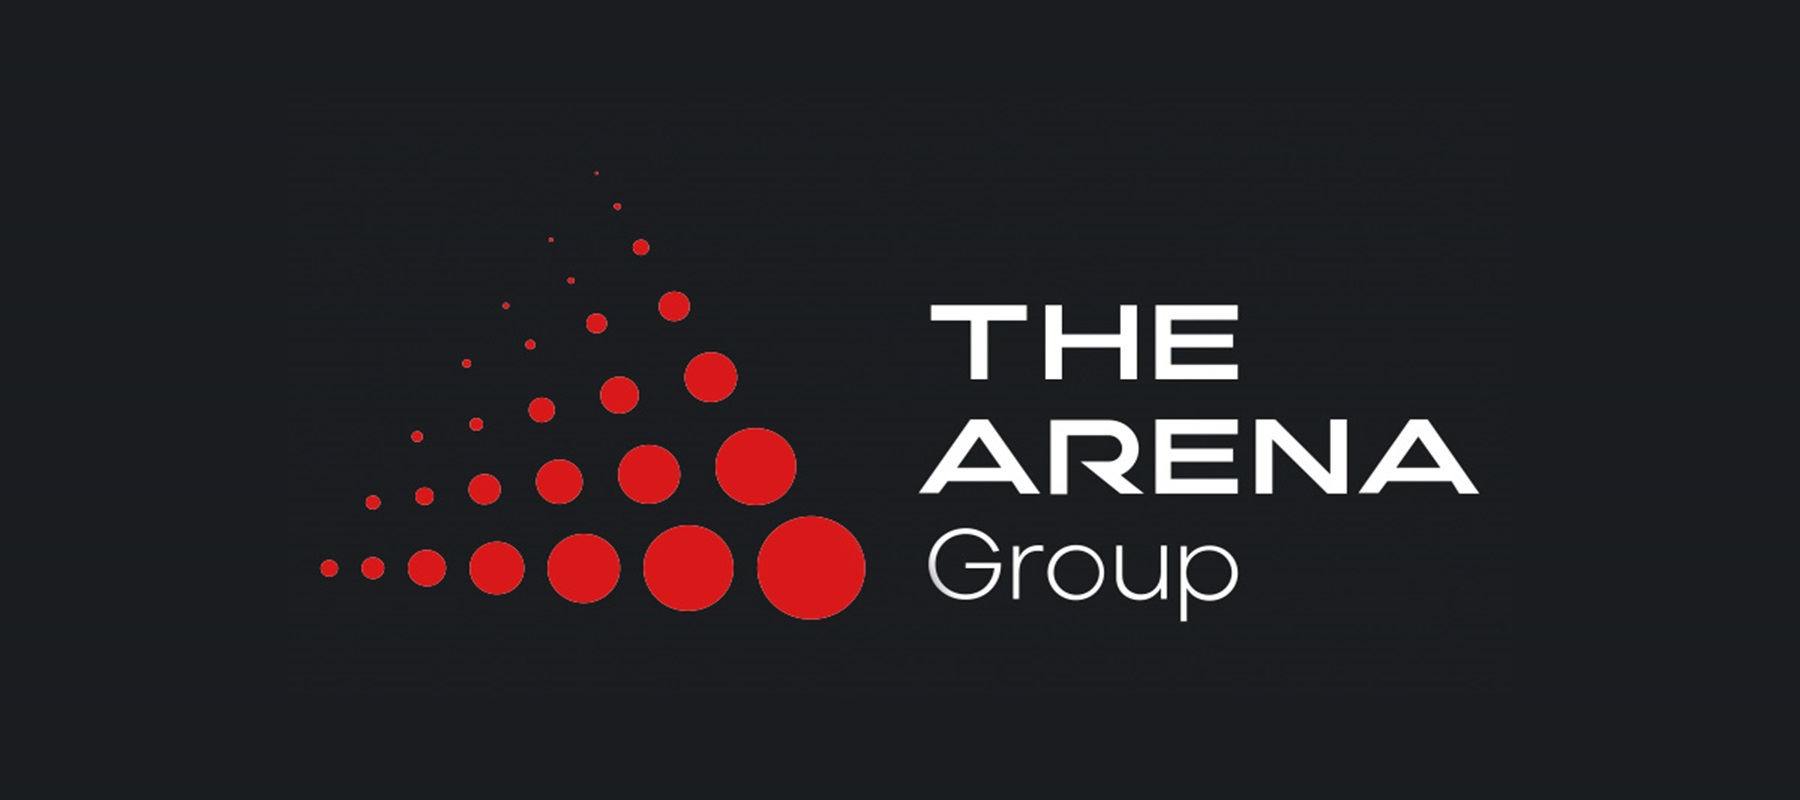 Media firm The Arena Group signs agreement to combine with Bridge Media Networks